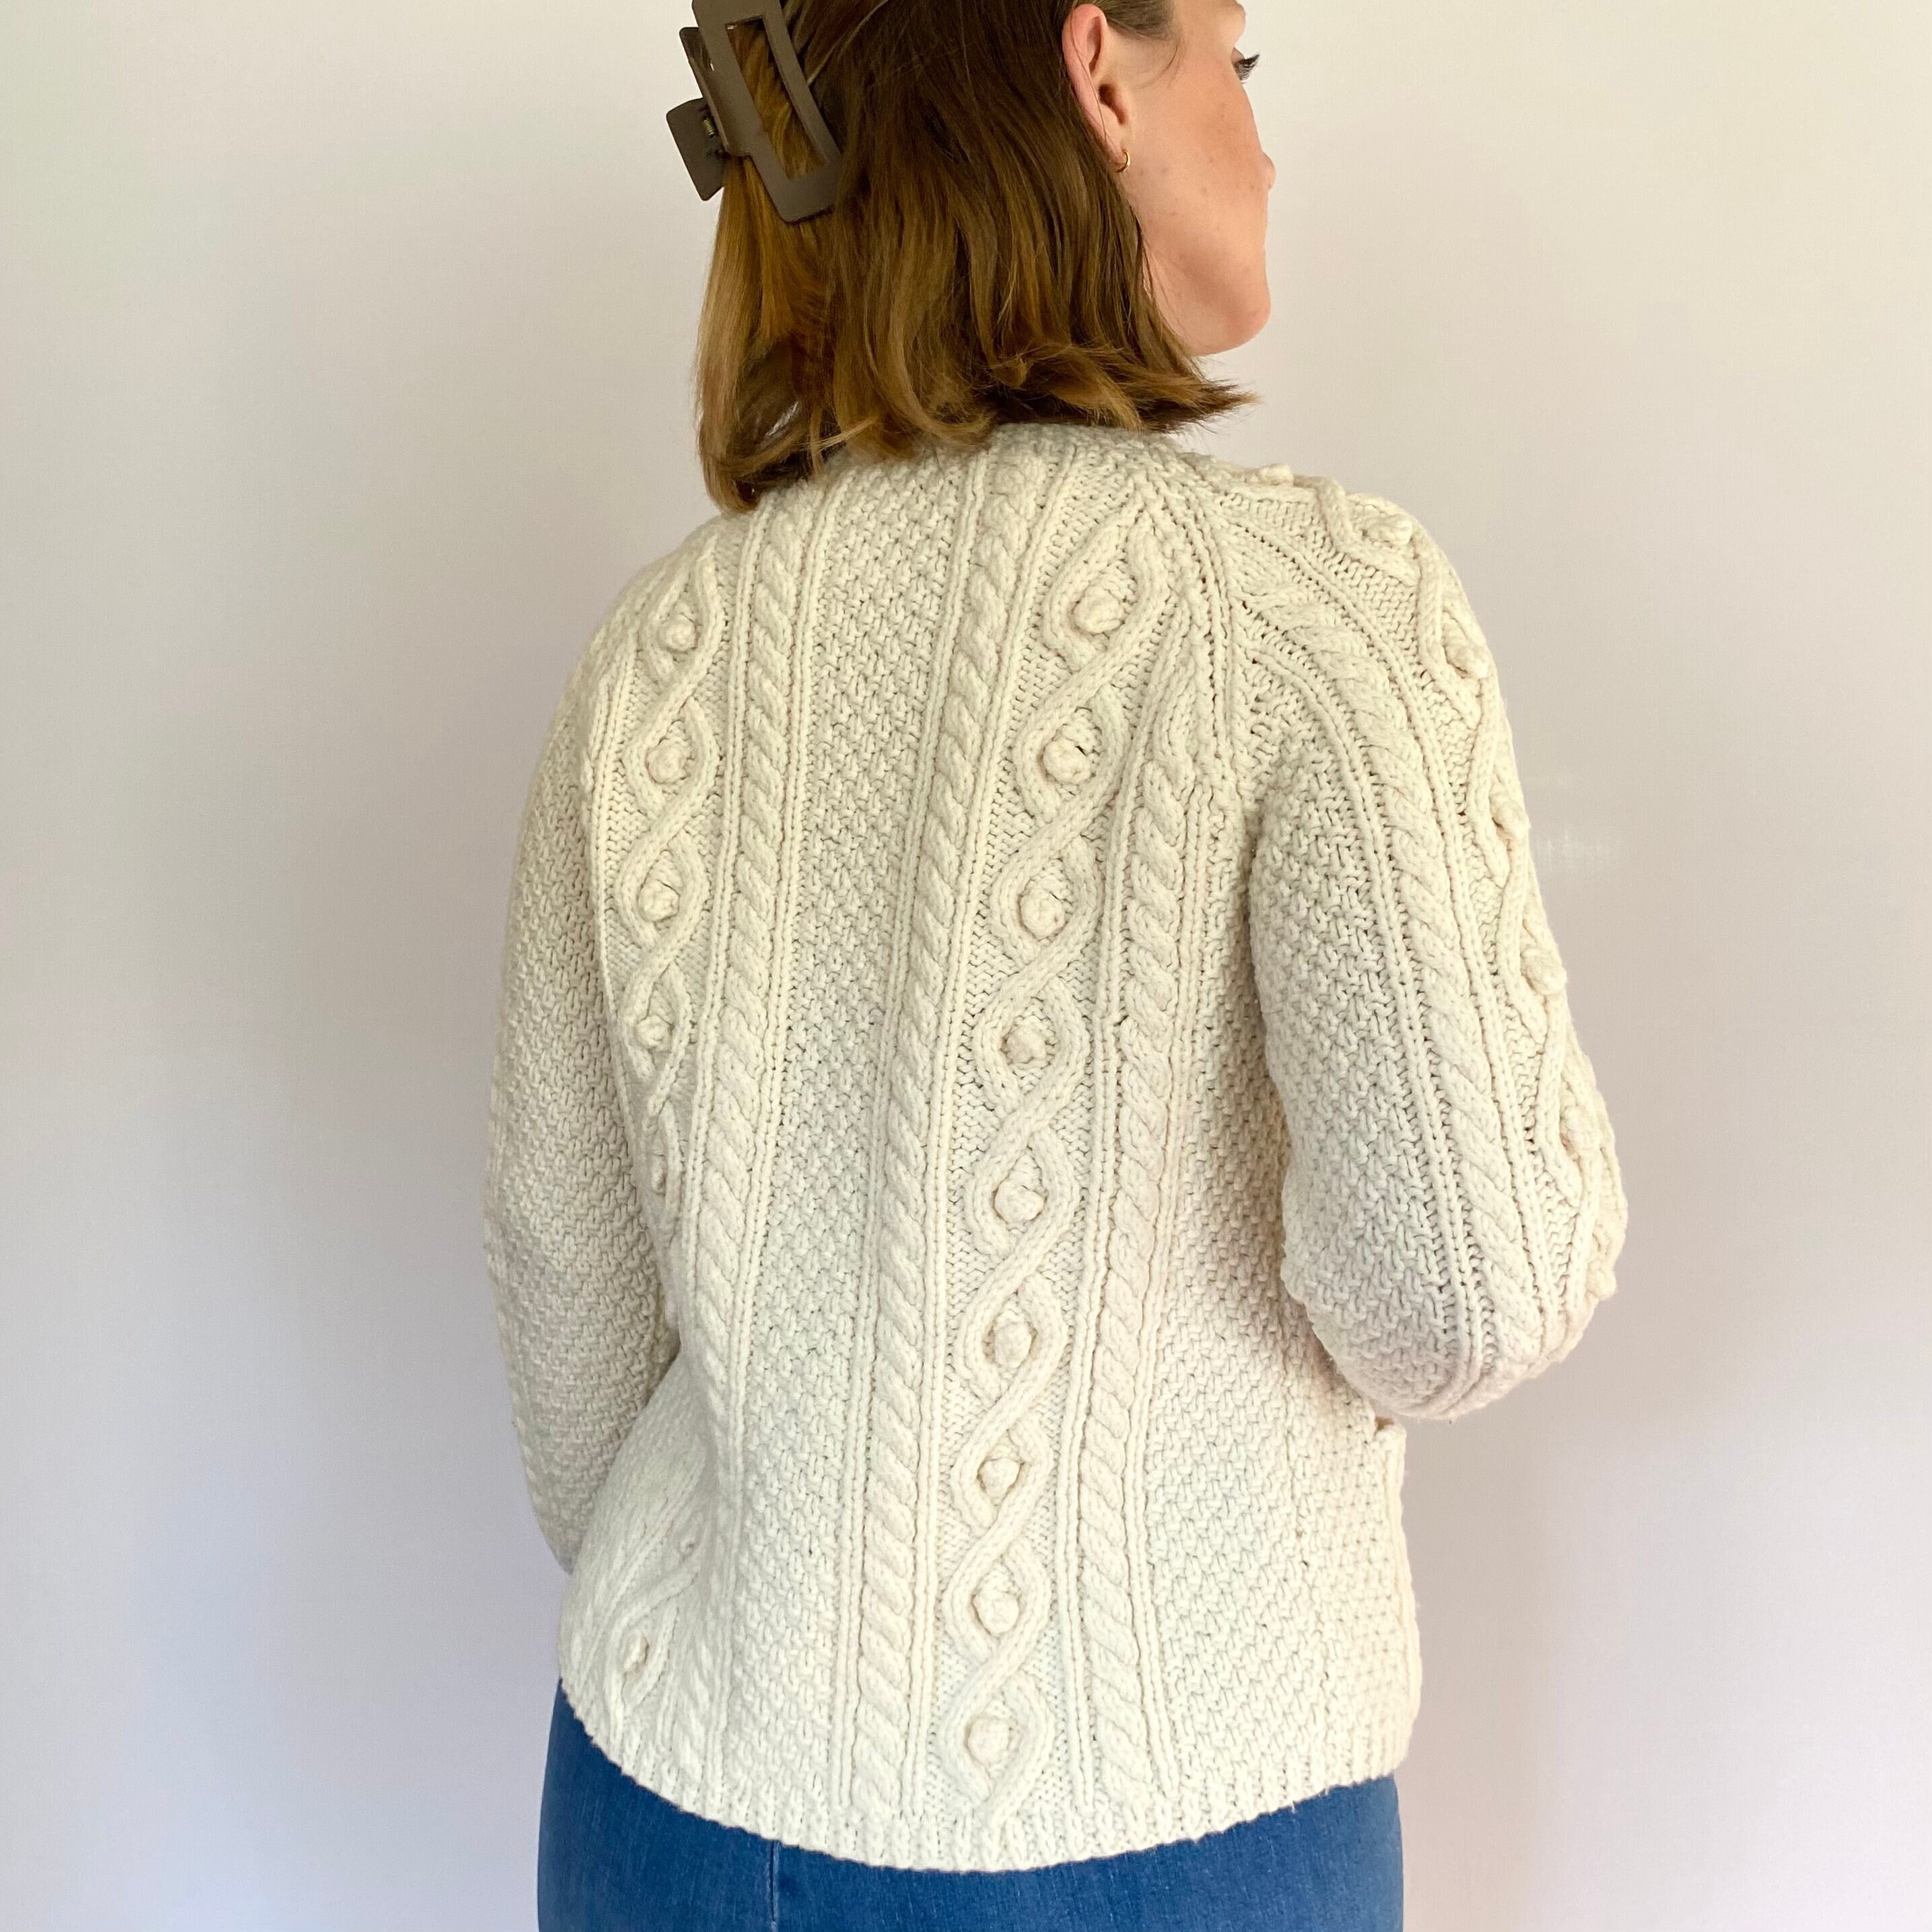 Vintage Cable Knit Cardigan -  New Zealand